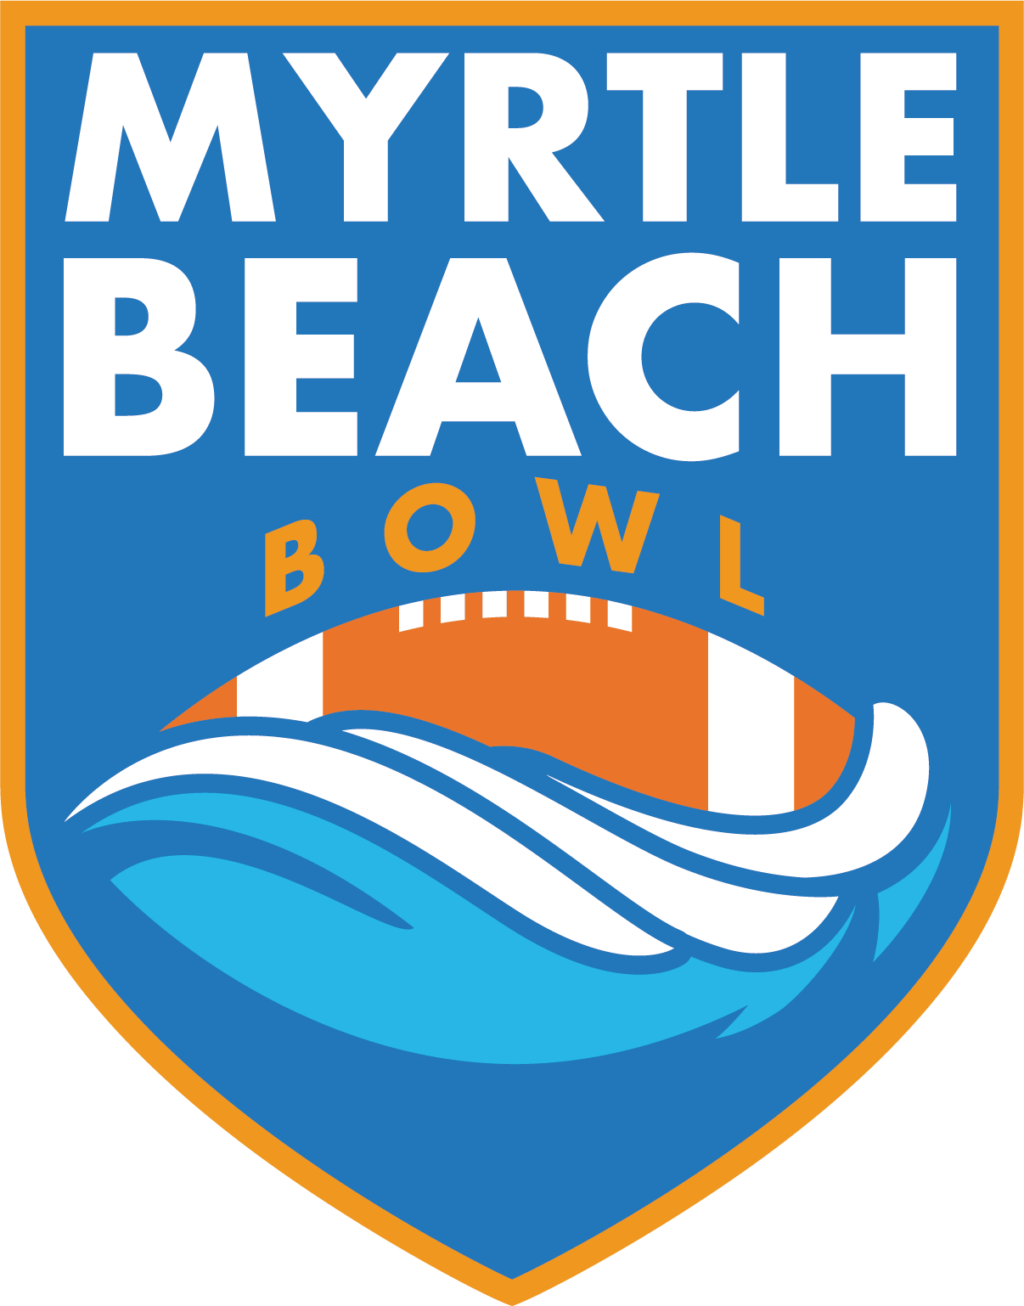 Myrtle Beach Bowl Ohio Bobcats and Southern Eagles